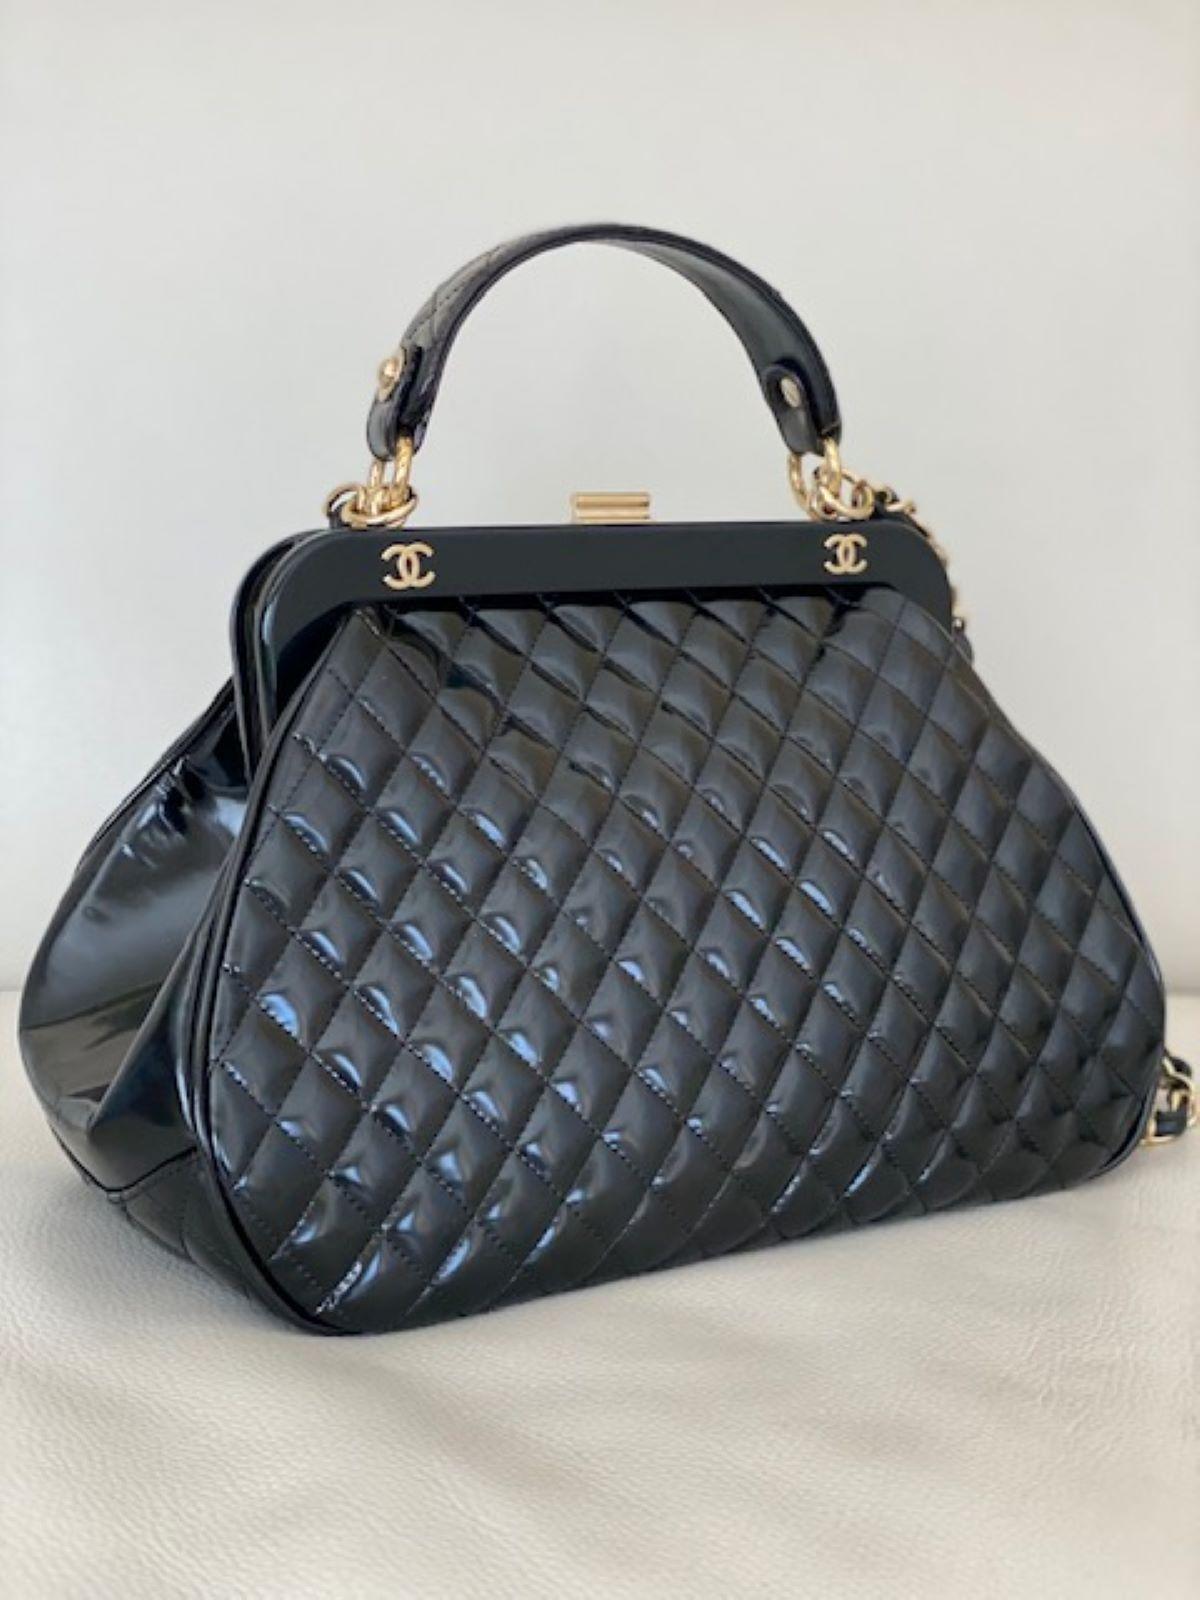 Worn by Kim K. in a larger version

In excellent condition minor wrinkles to patent leather on bottom of bag. Can be worn as a wrist satchel, top handle bag or as a shoulder bag using the chain.

Breathtaking classic piece with gold hardware